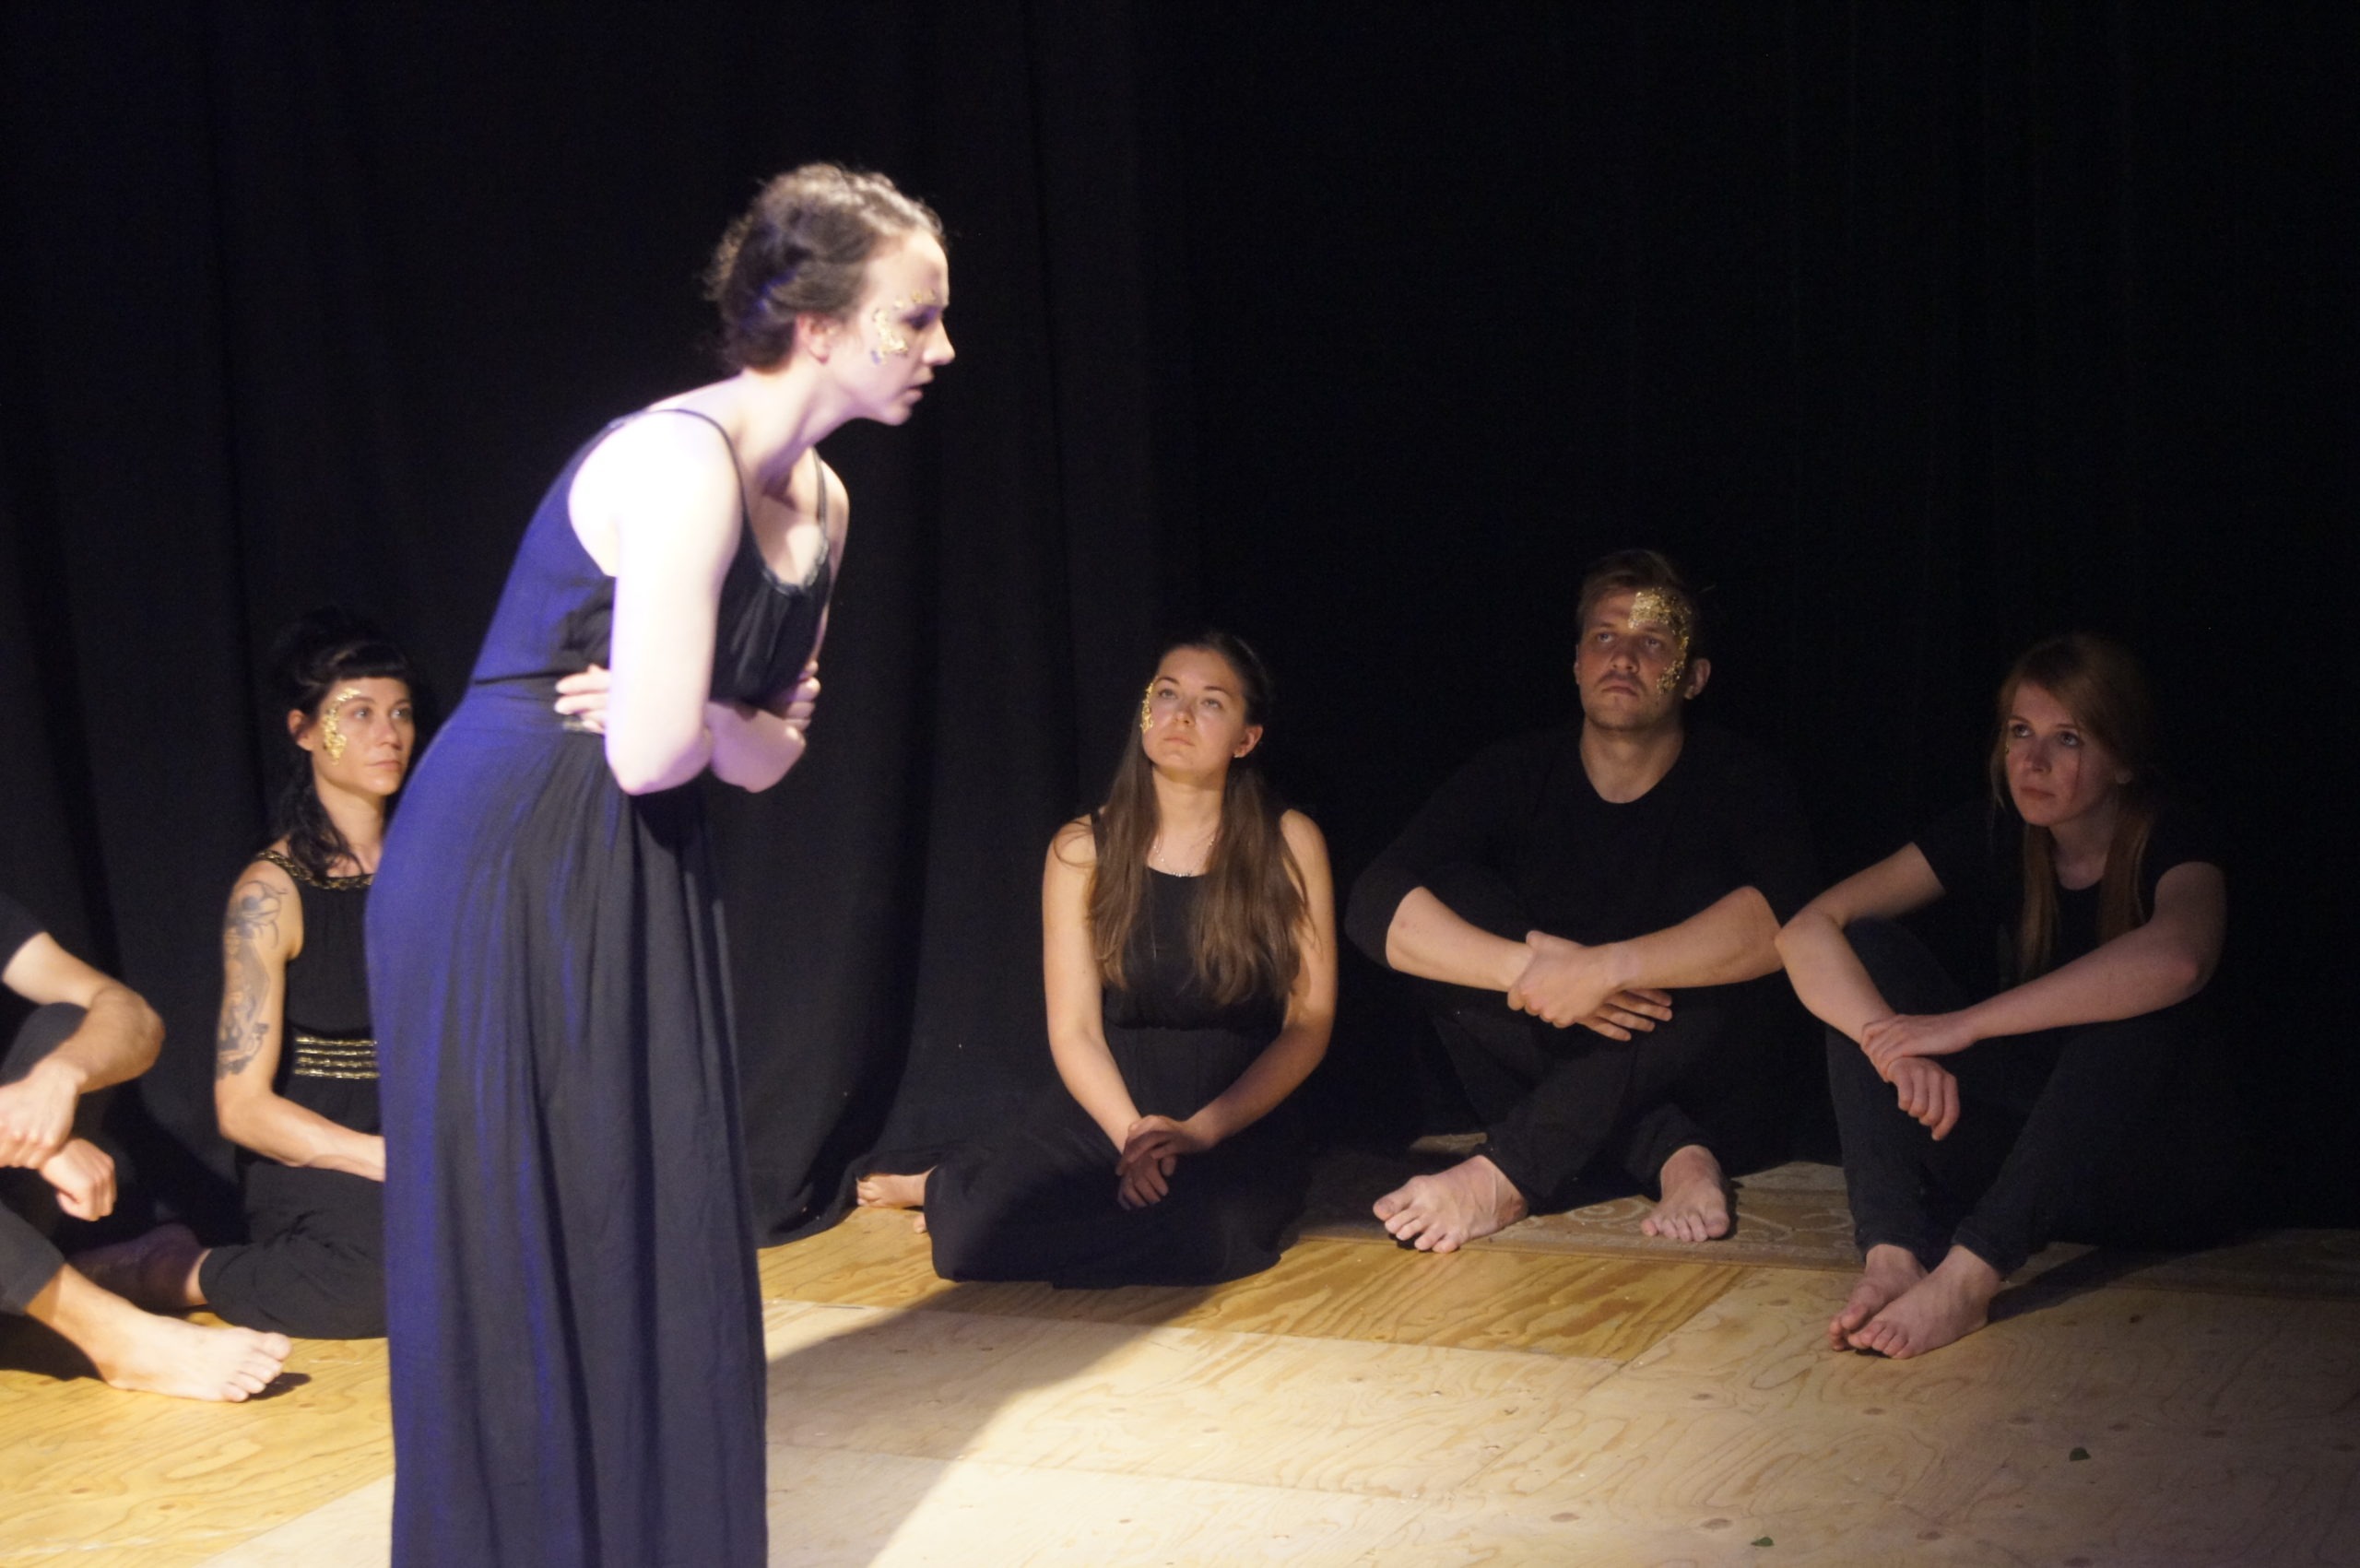 Photo from the theatre performance Keeping up with the Greeks. Woman on stage with a black dress, brown hair, golden flakes on her right cheek, holding her stomach. Behind her, four actors on the floor, black clothes, golden flakes on their face